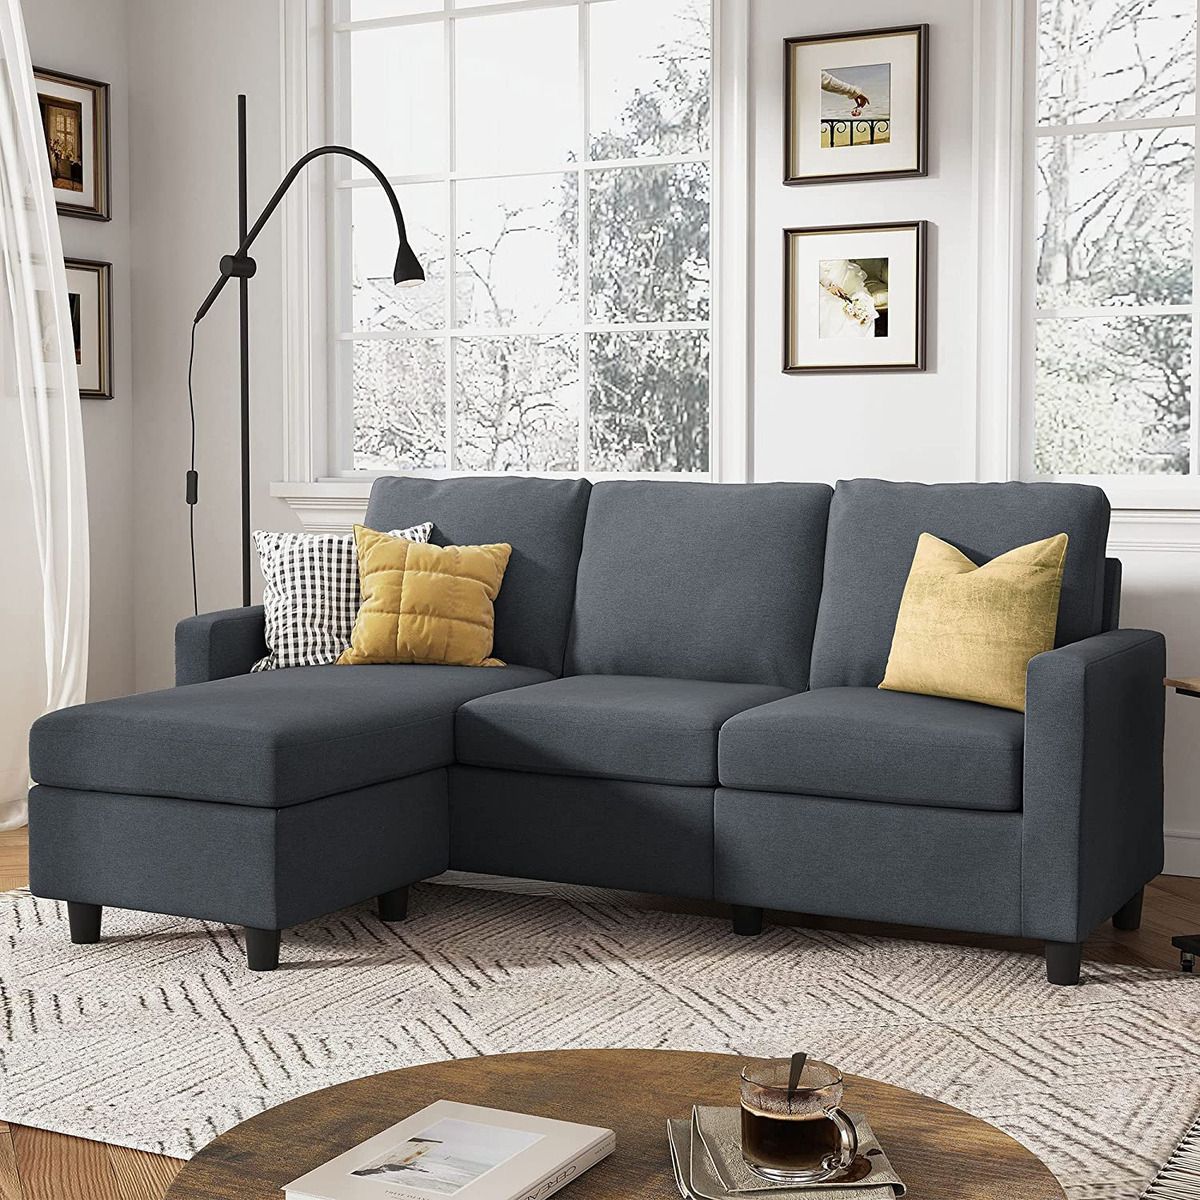 Honbay Convertible Sectional Sofa, L Shaped Couch With Reversible Chaise  For Sma | Ebay Inside L Shape Couches With Reversible Chaises (View 2 of 15)